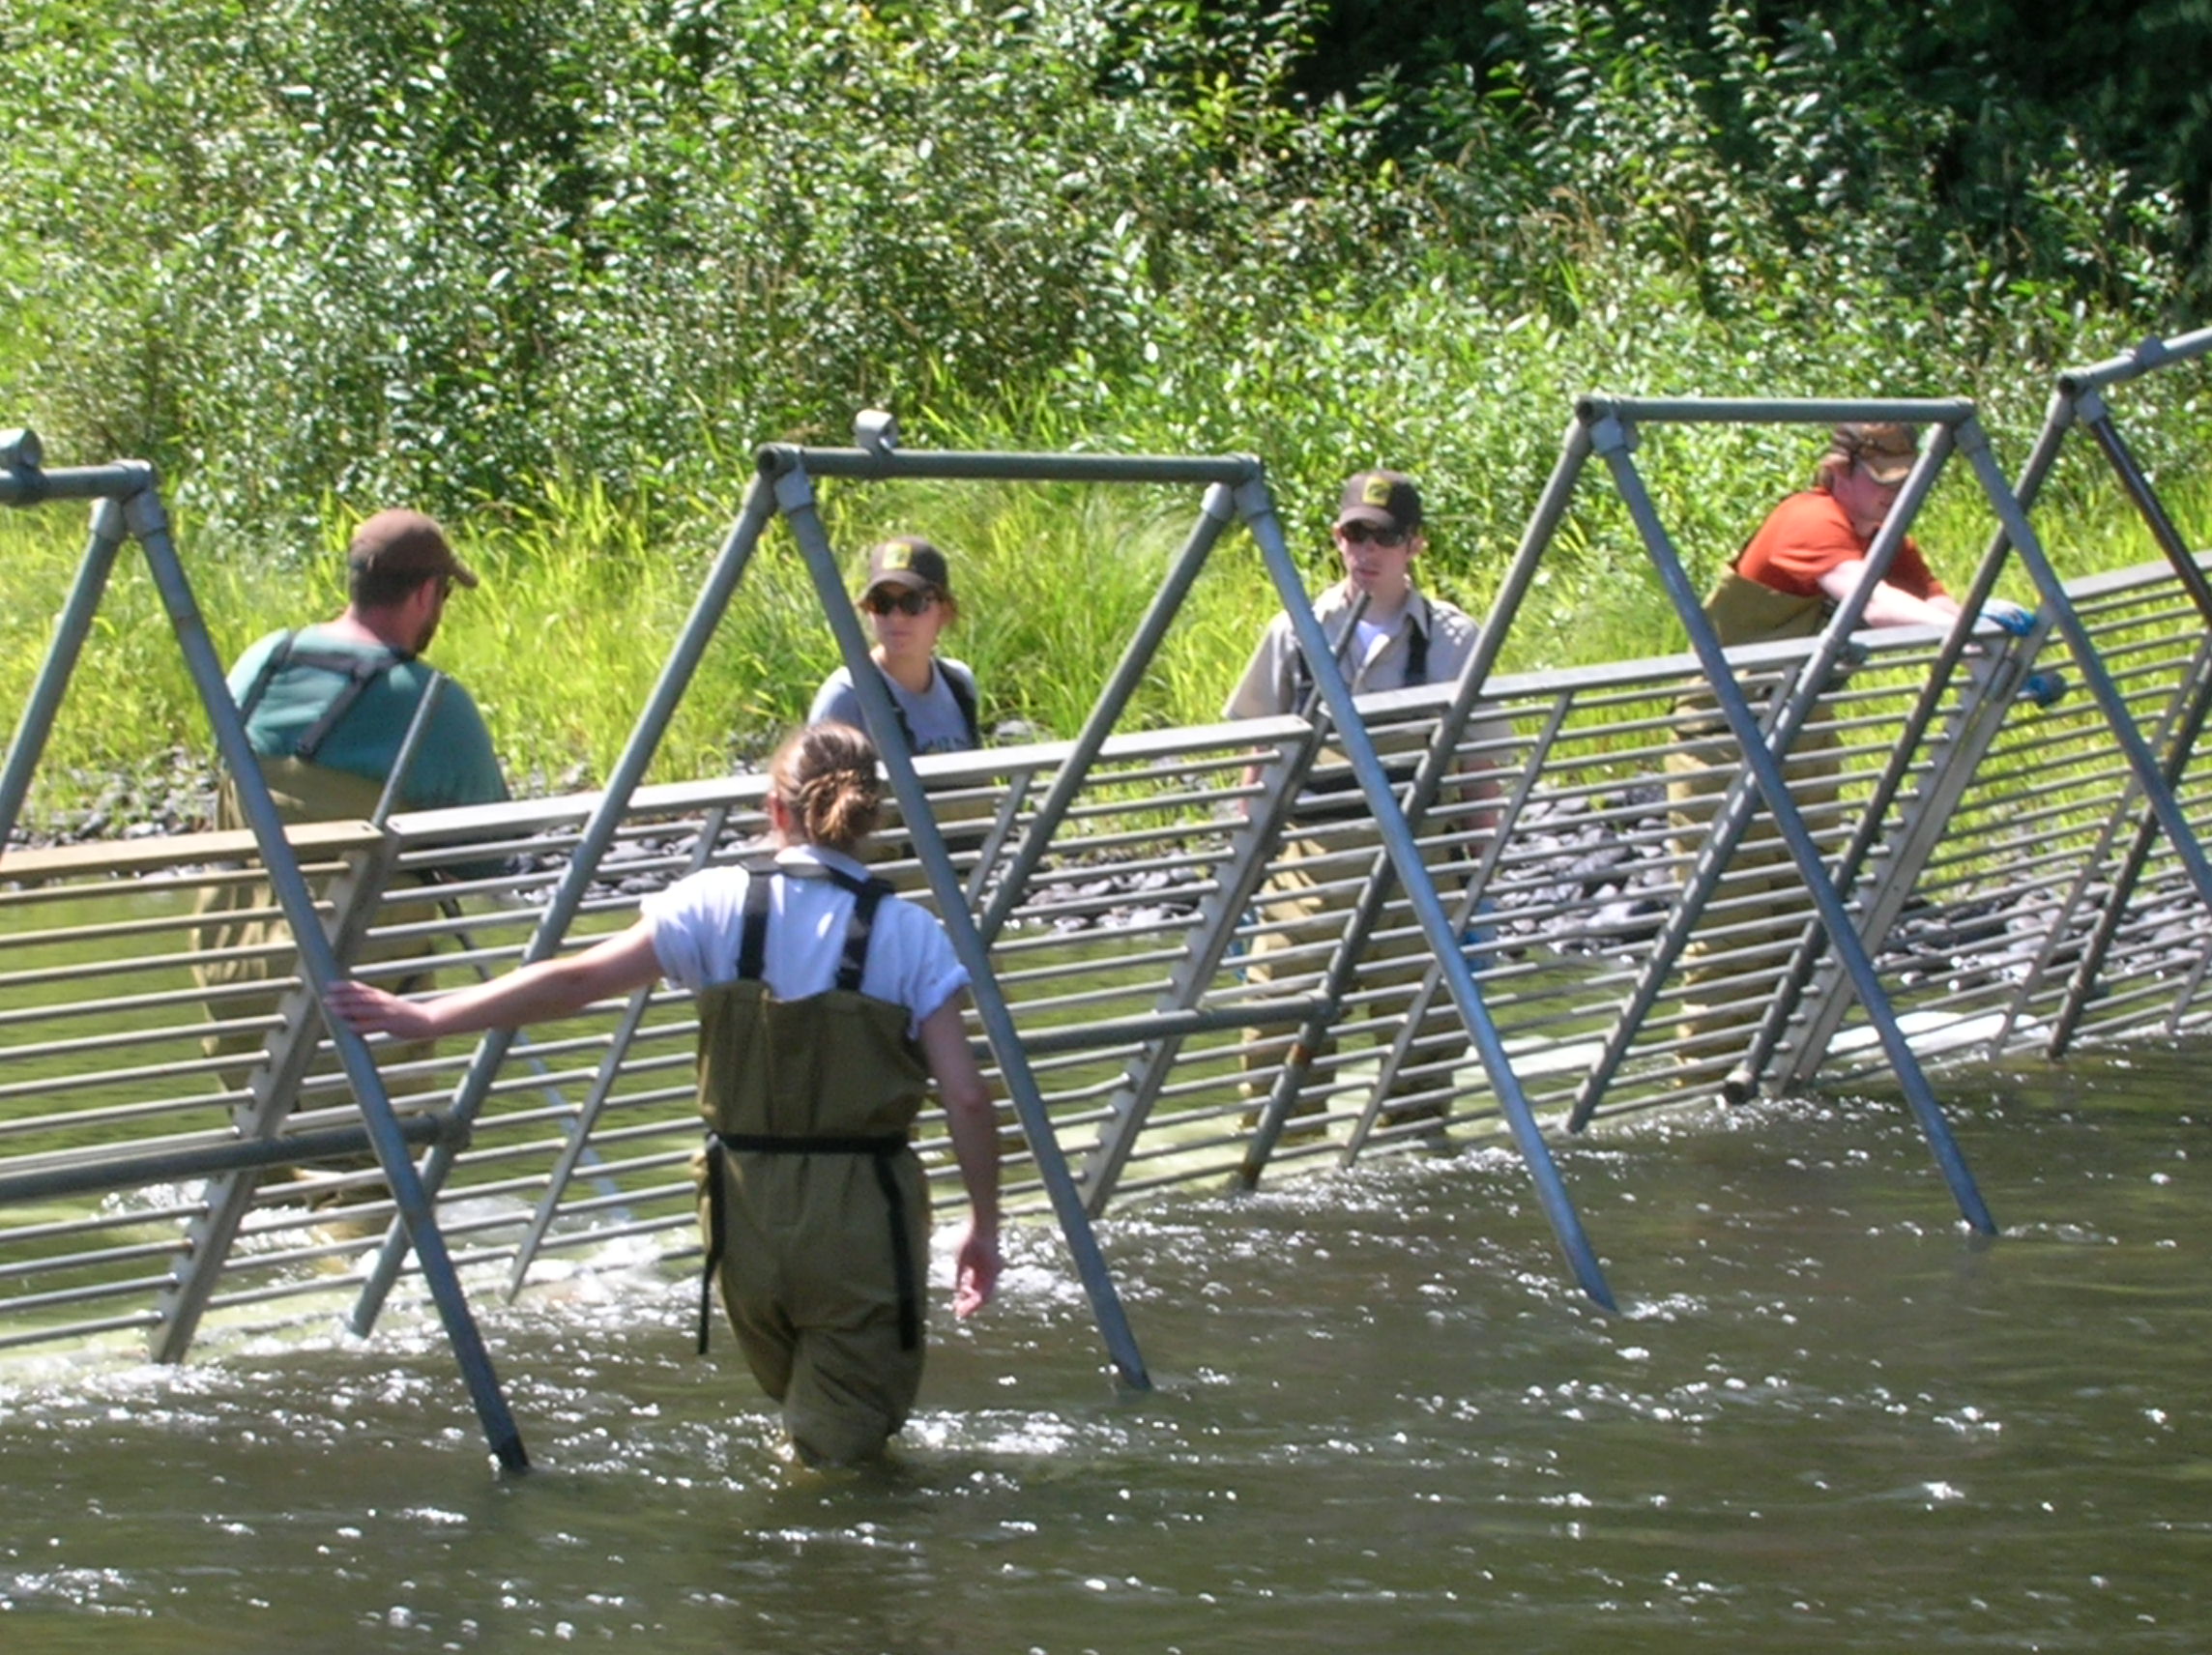 setting up a fish weir for mark-recapture